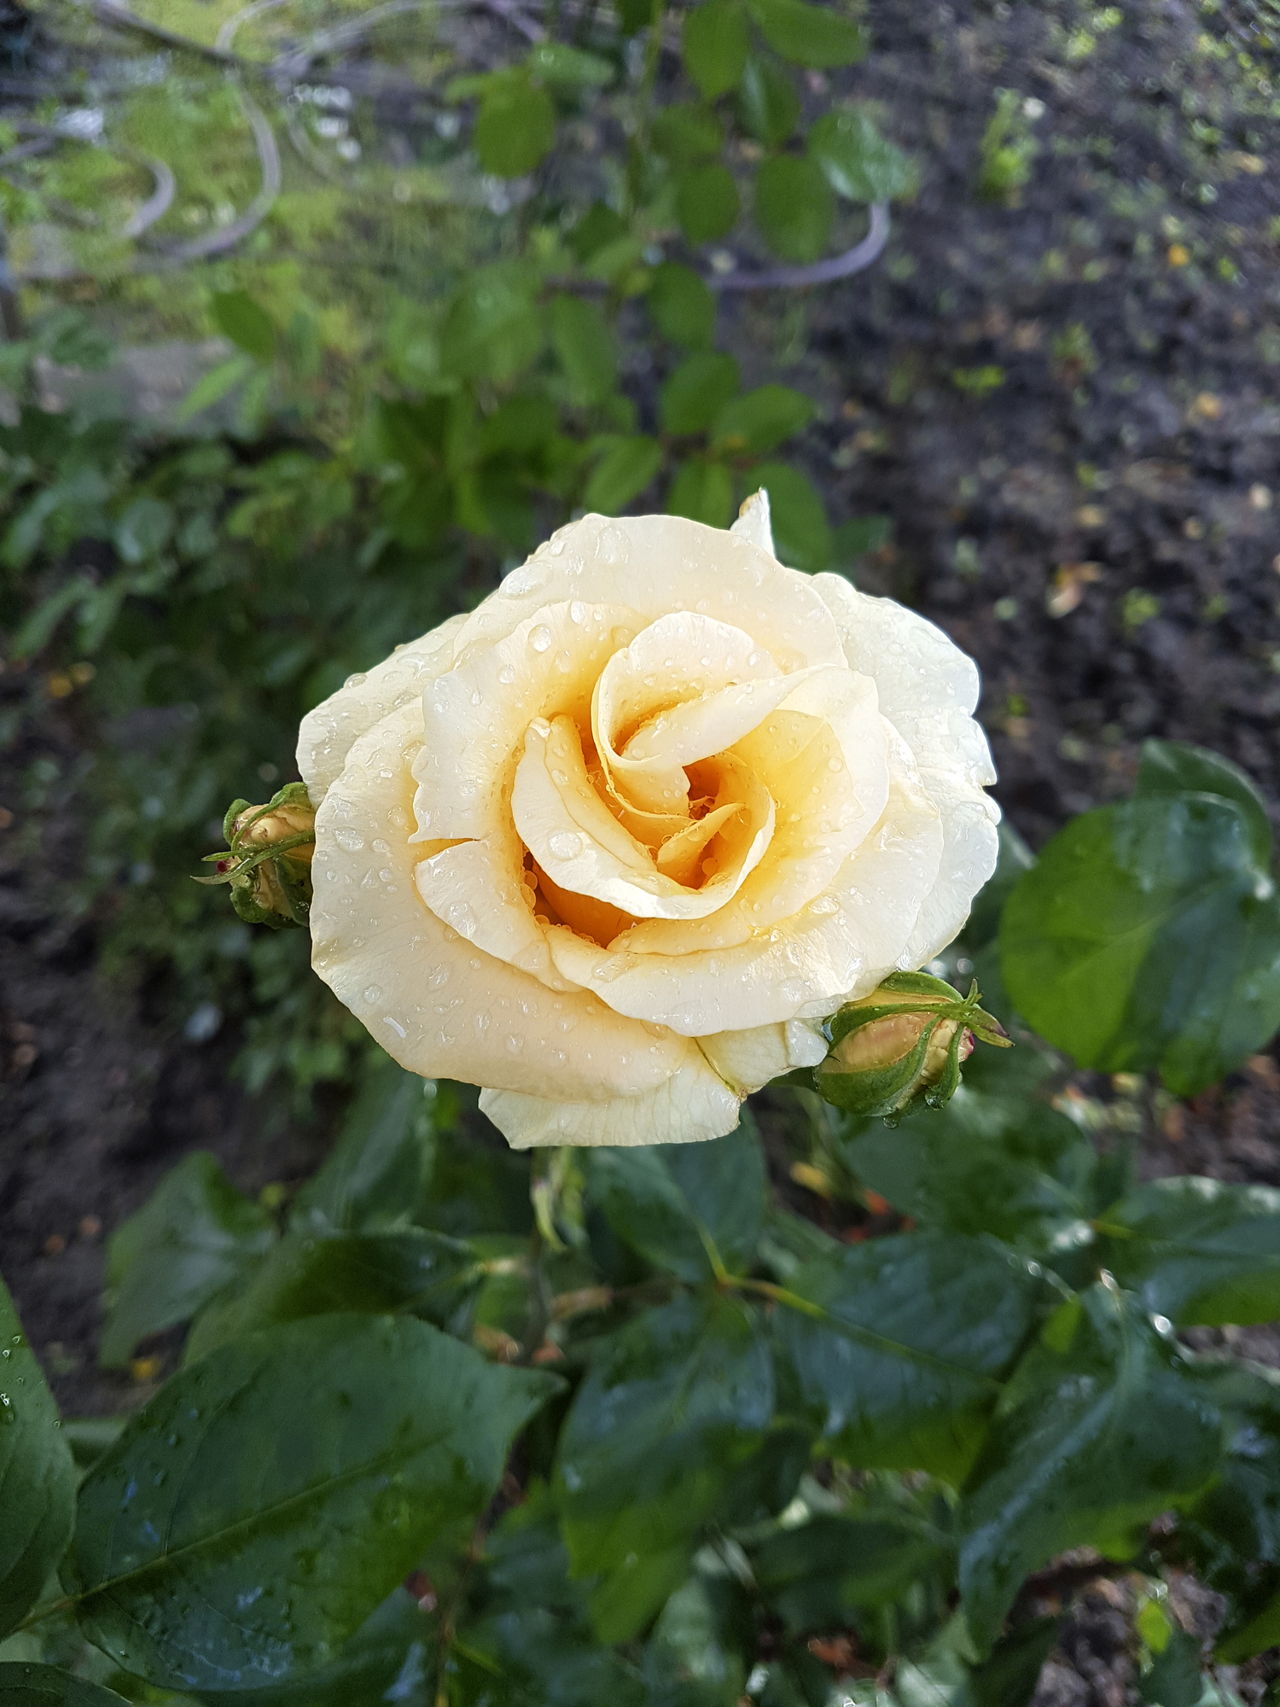 How To Prune Roses Pruning In 8 Easy Steps Garden Layout